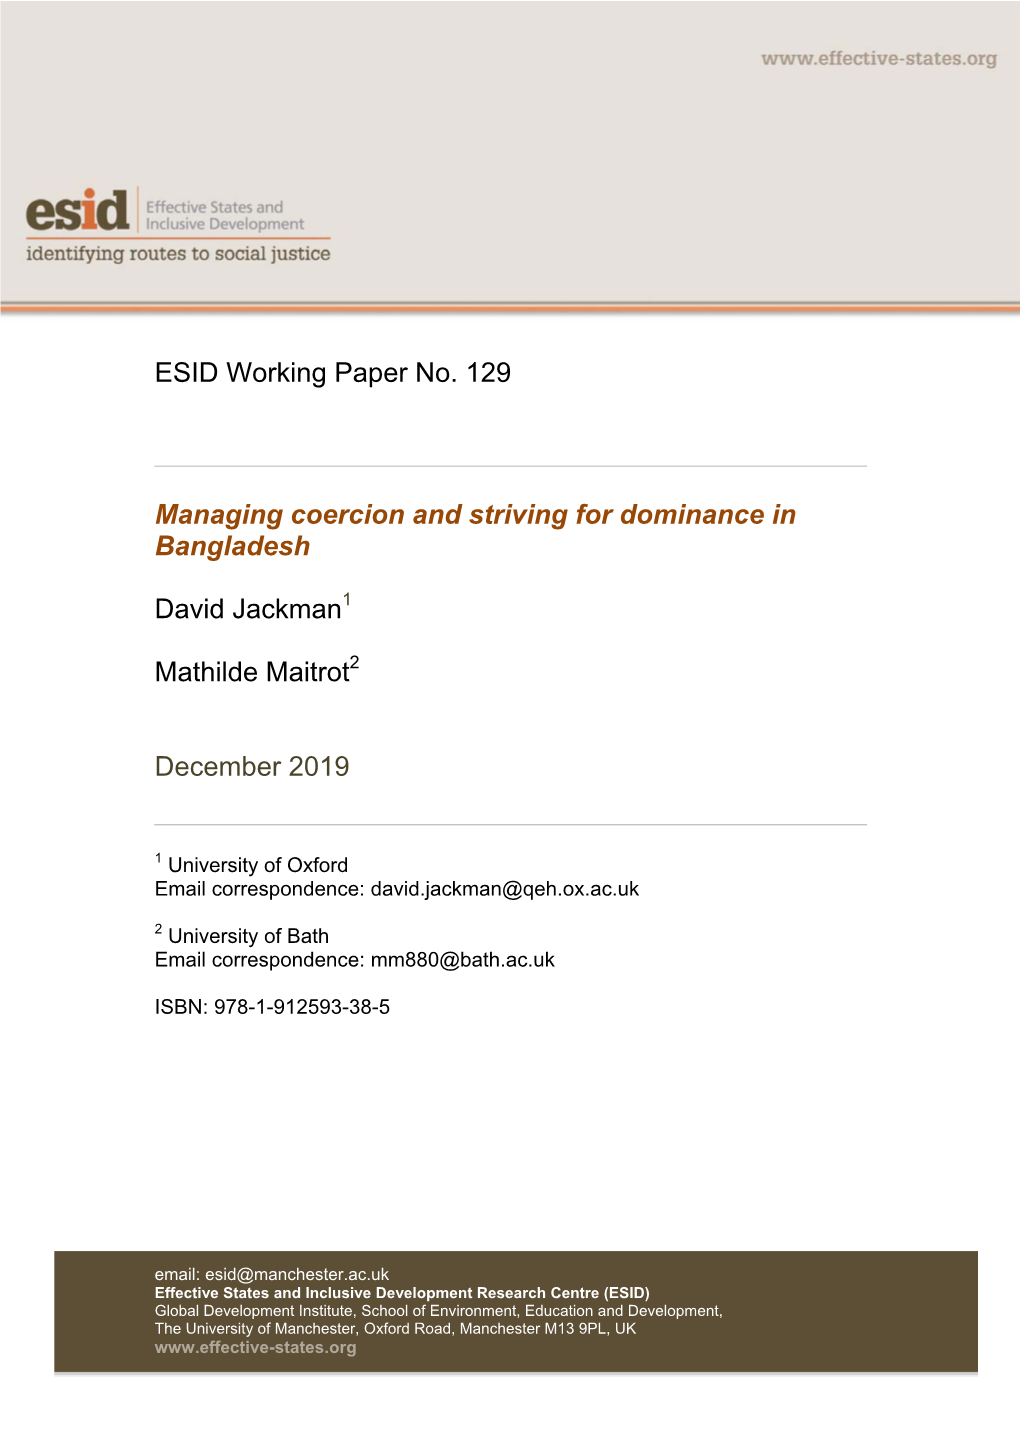 ESID Working Paper No. 129 Managing Coercion and Striving For